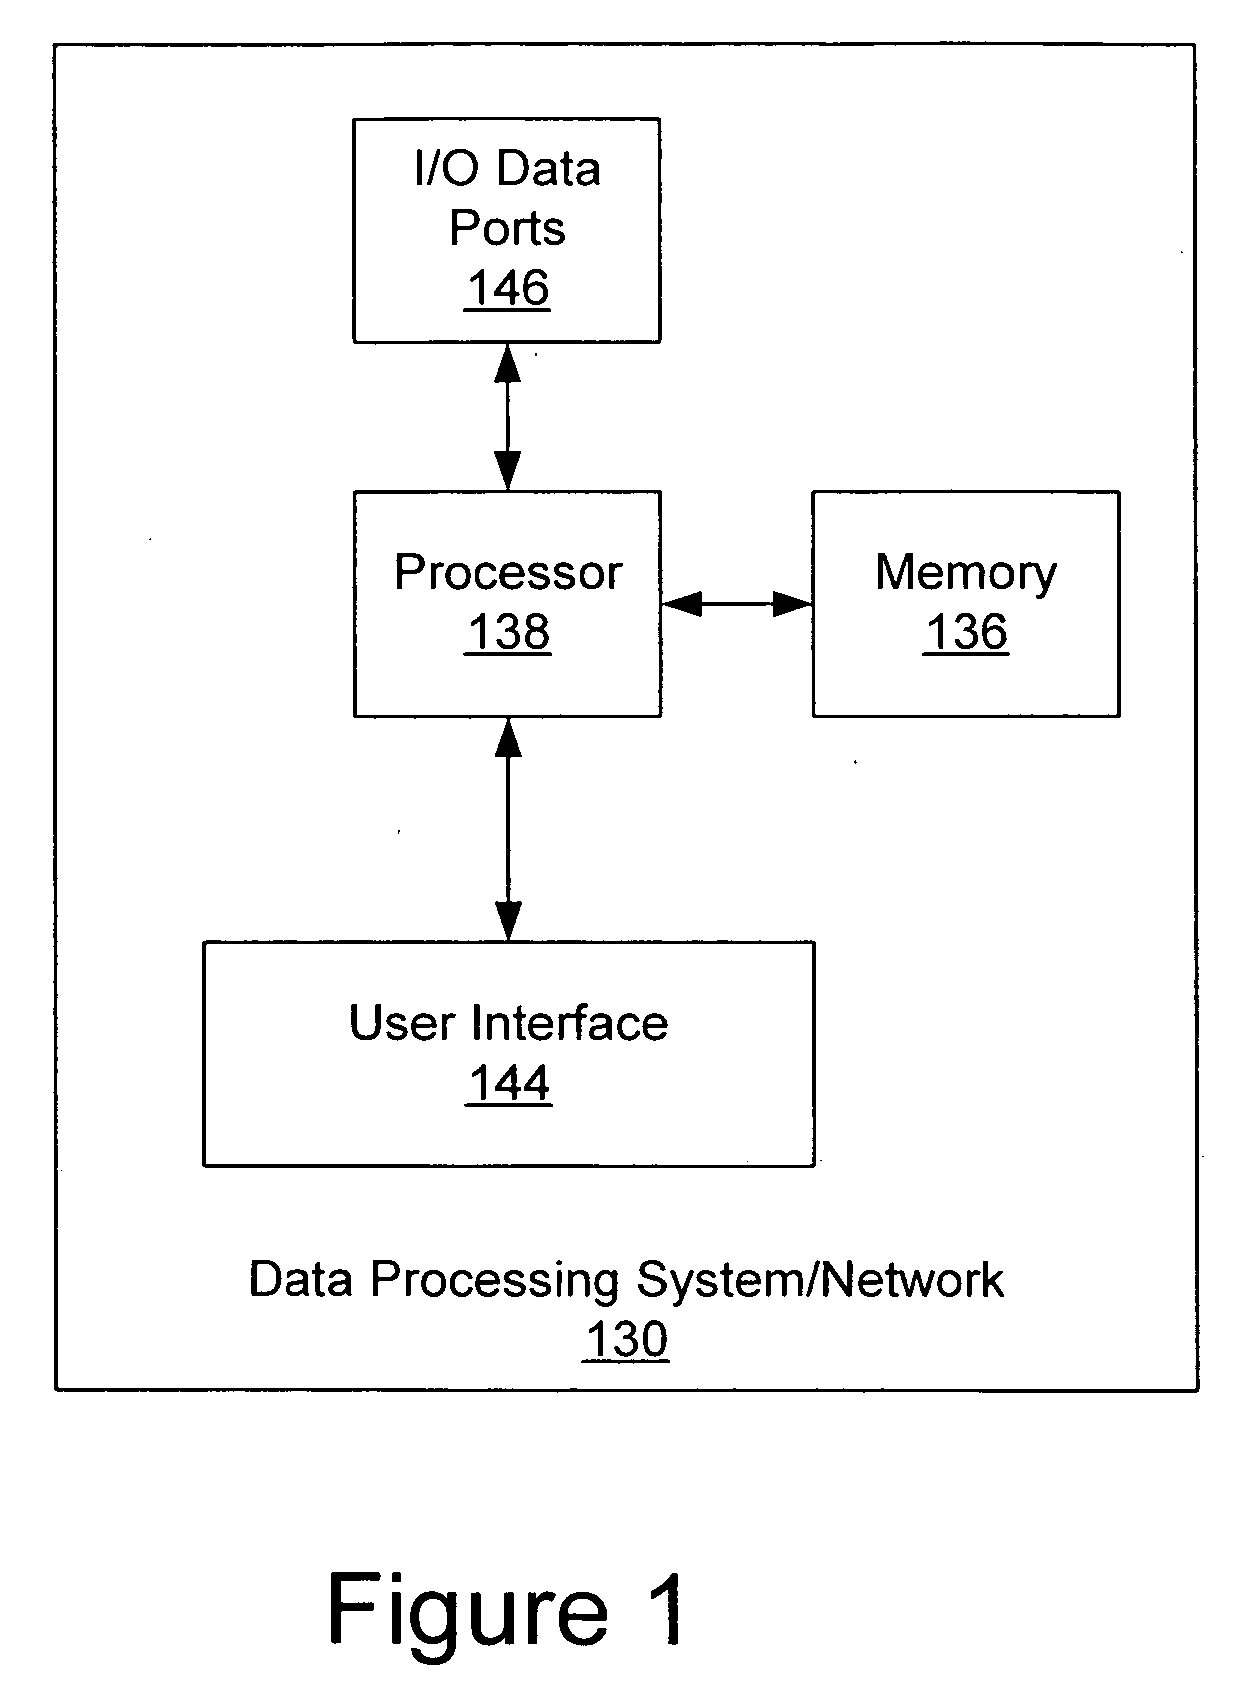 Electronic butler for providing application services to a user